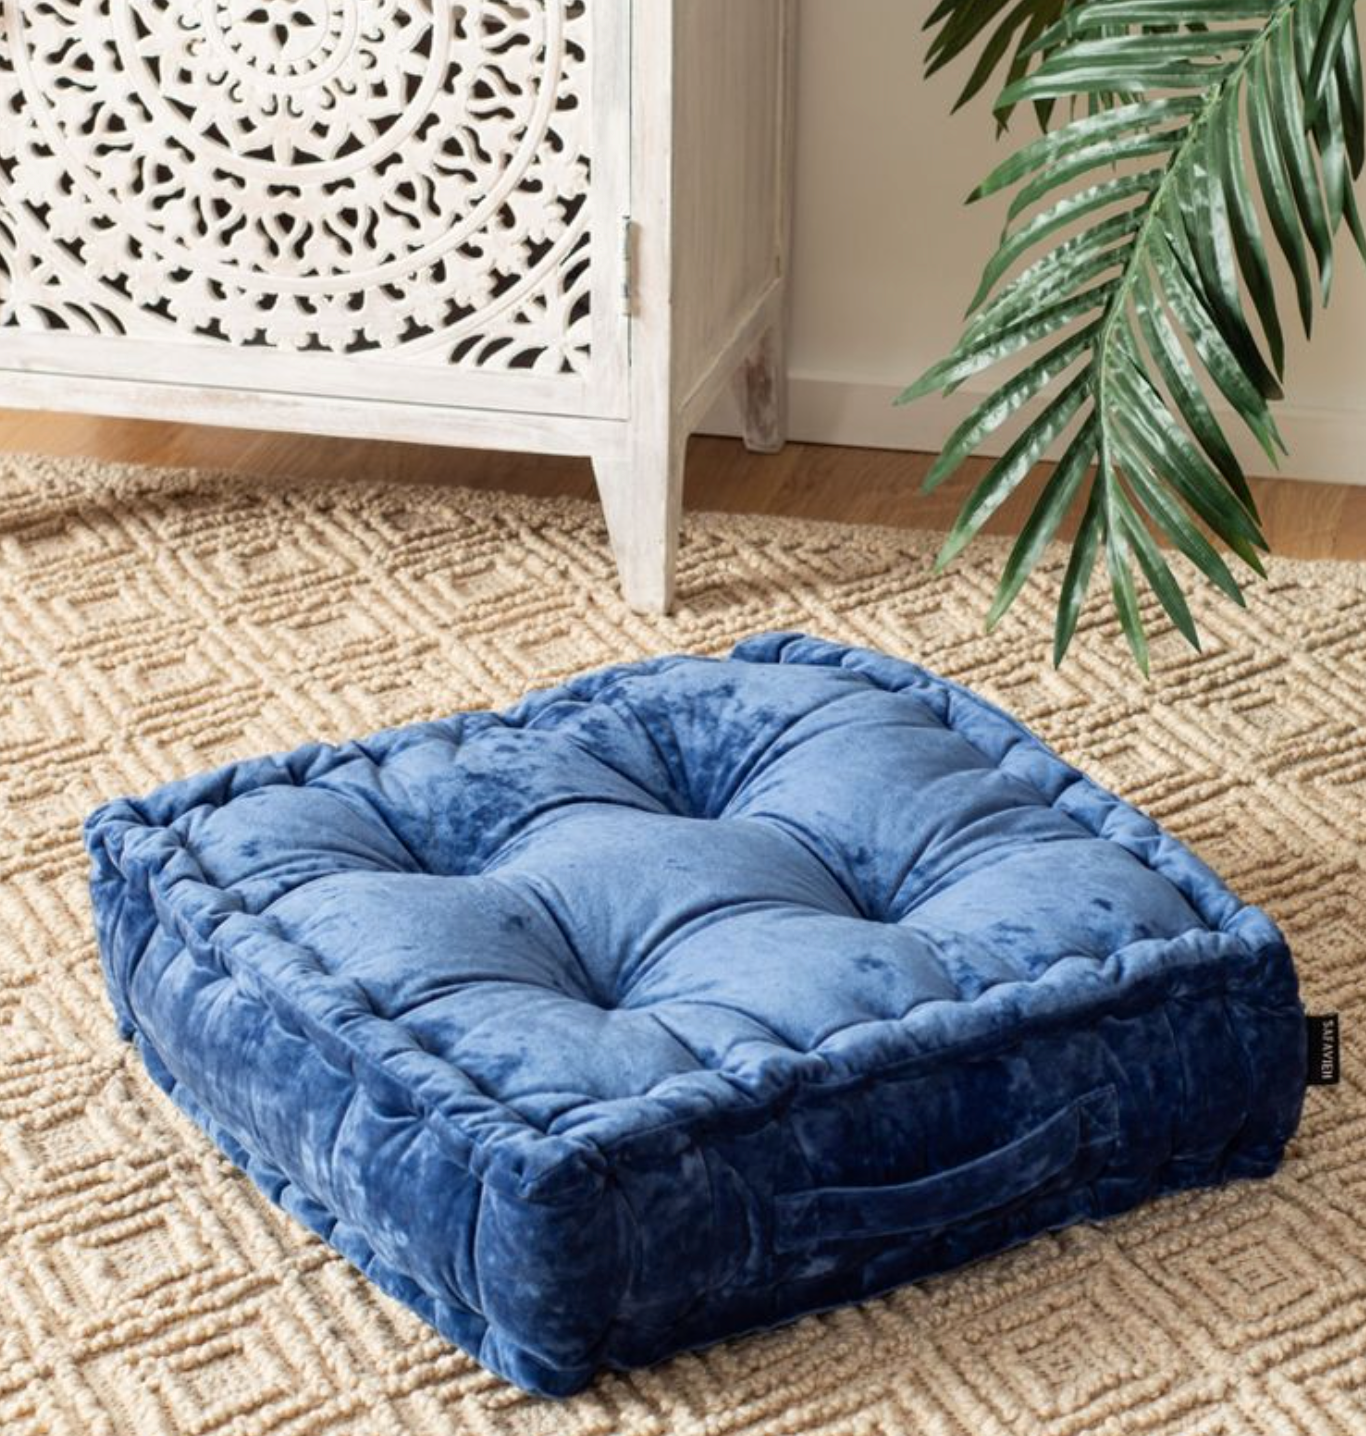 The Top 8 Best Floor Pillows To Maximize Comfort And Seating Space